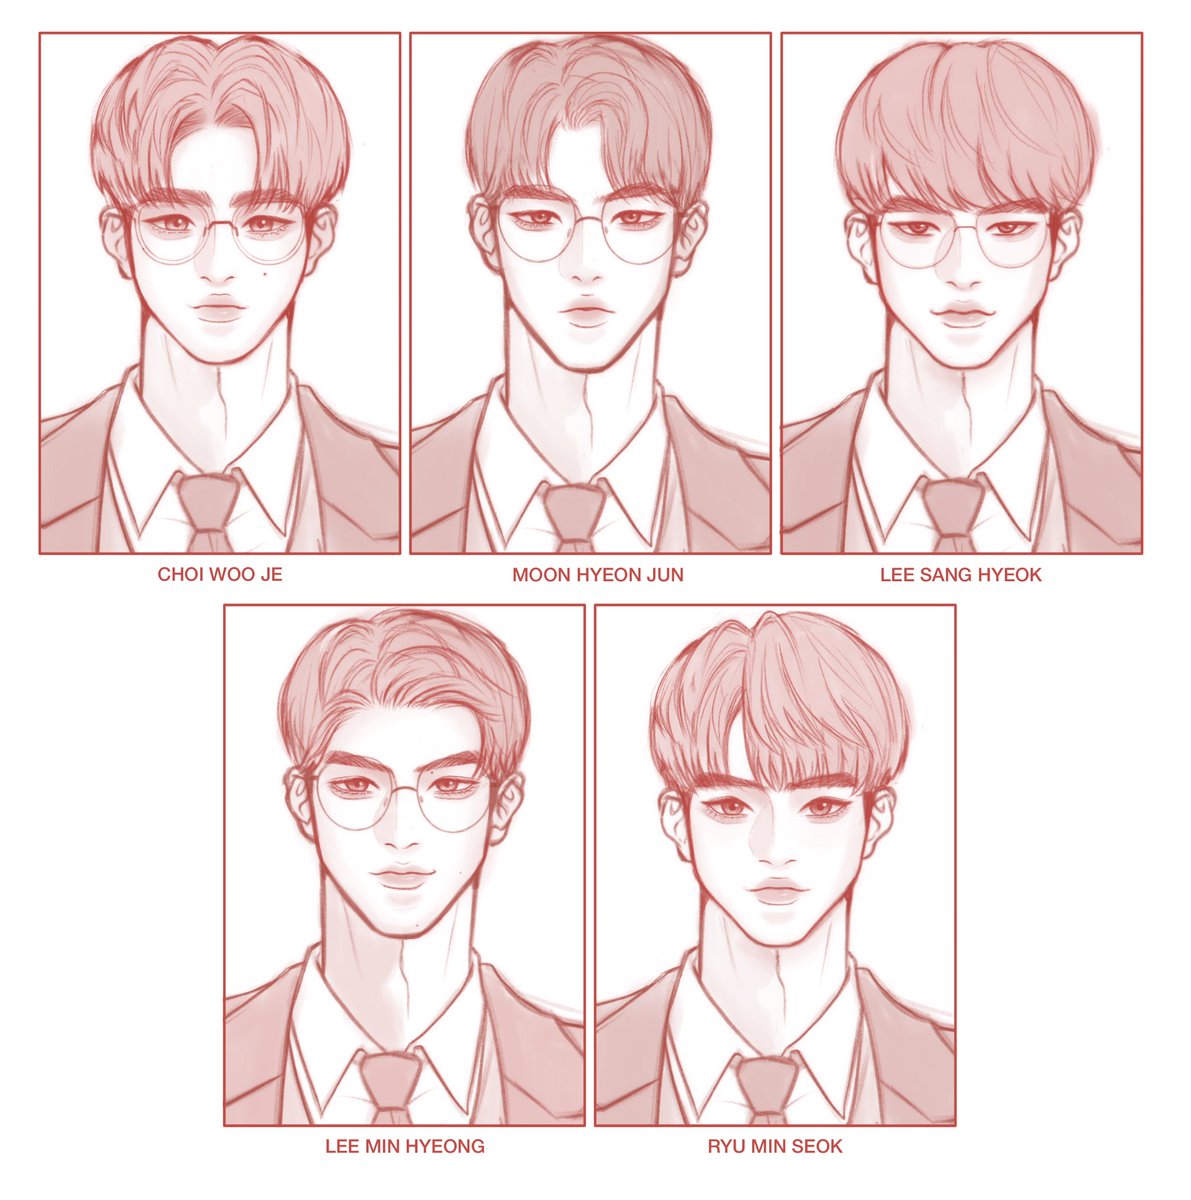 Telecom Brothers as Students 🪪✨
(currently a work in progress) 

#T1WIN #KTWIN 